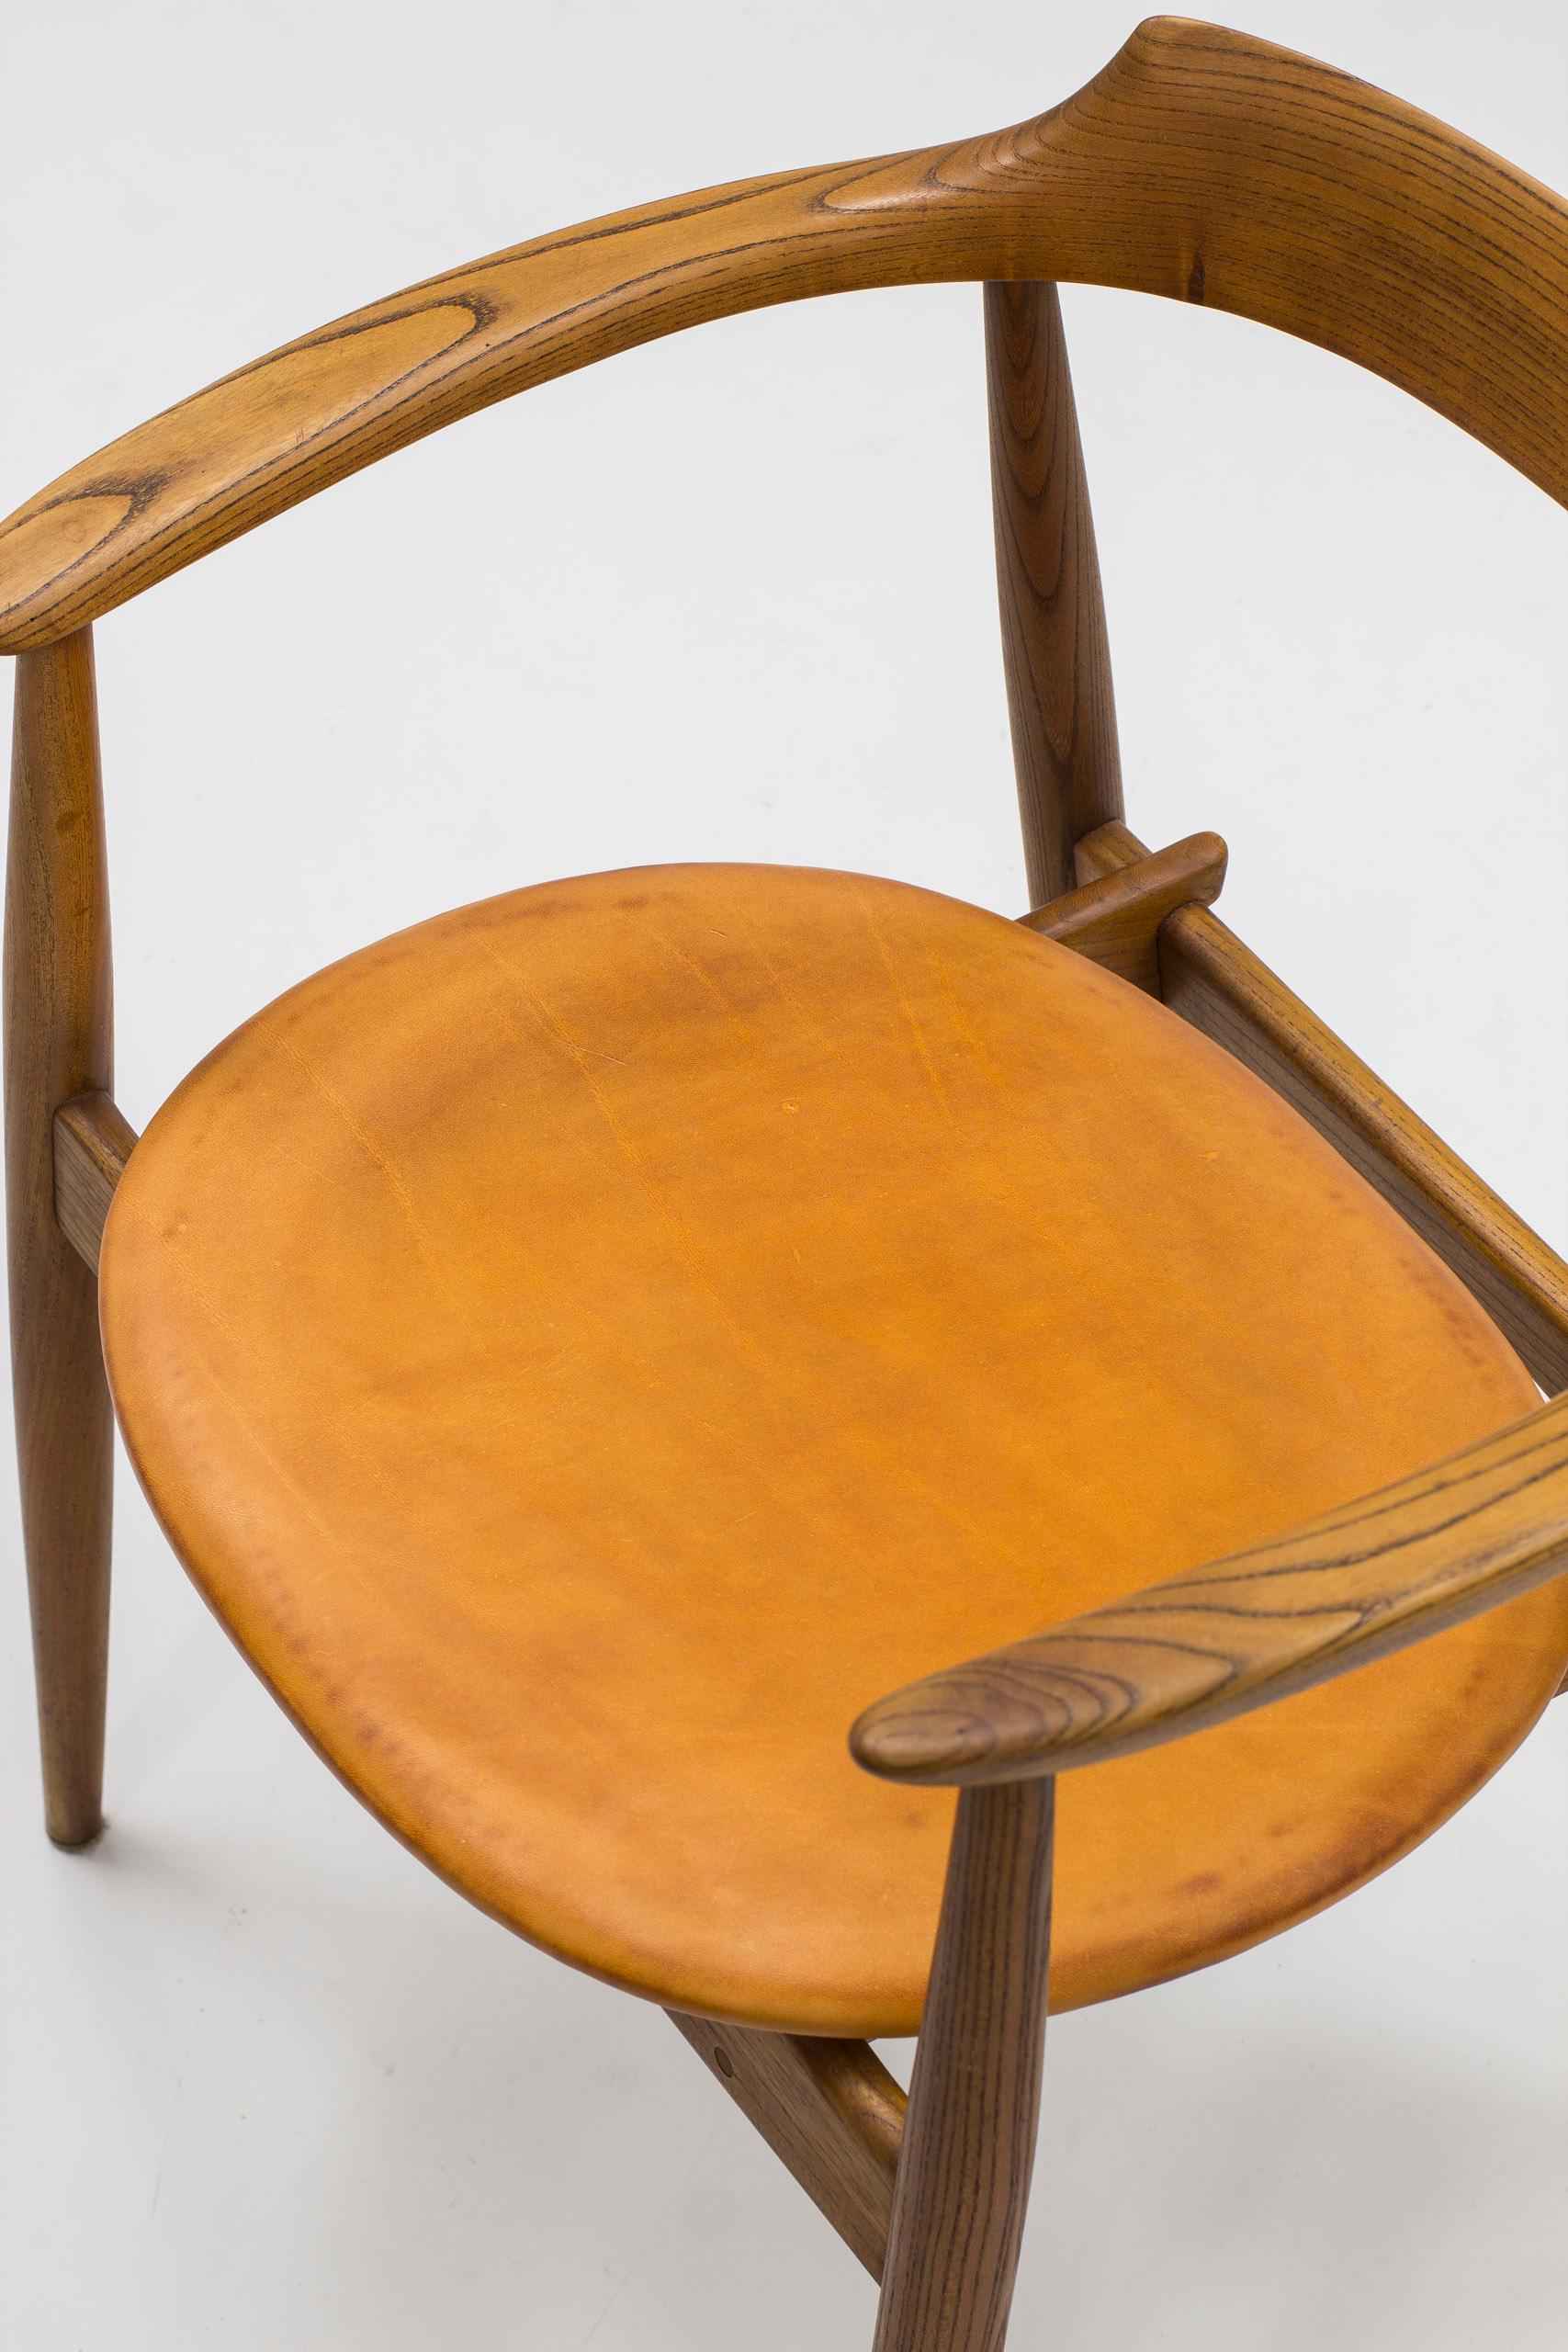 Leather Arm chair in elm and leather with exquisite patina by Arne Wahl Iversen, 1960s For Sale